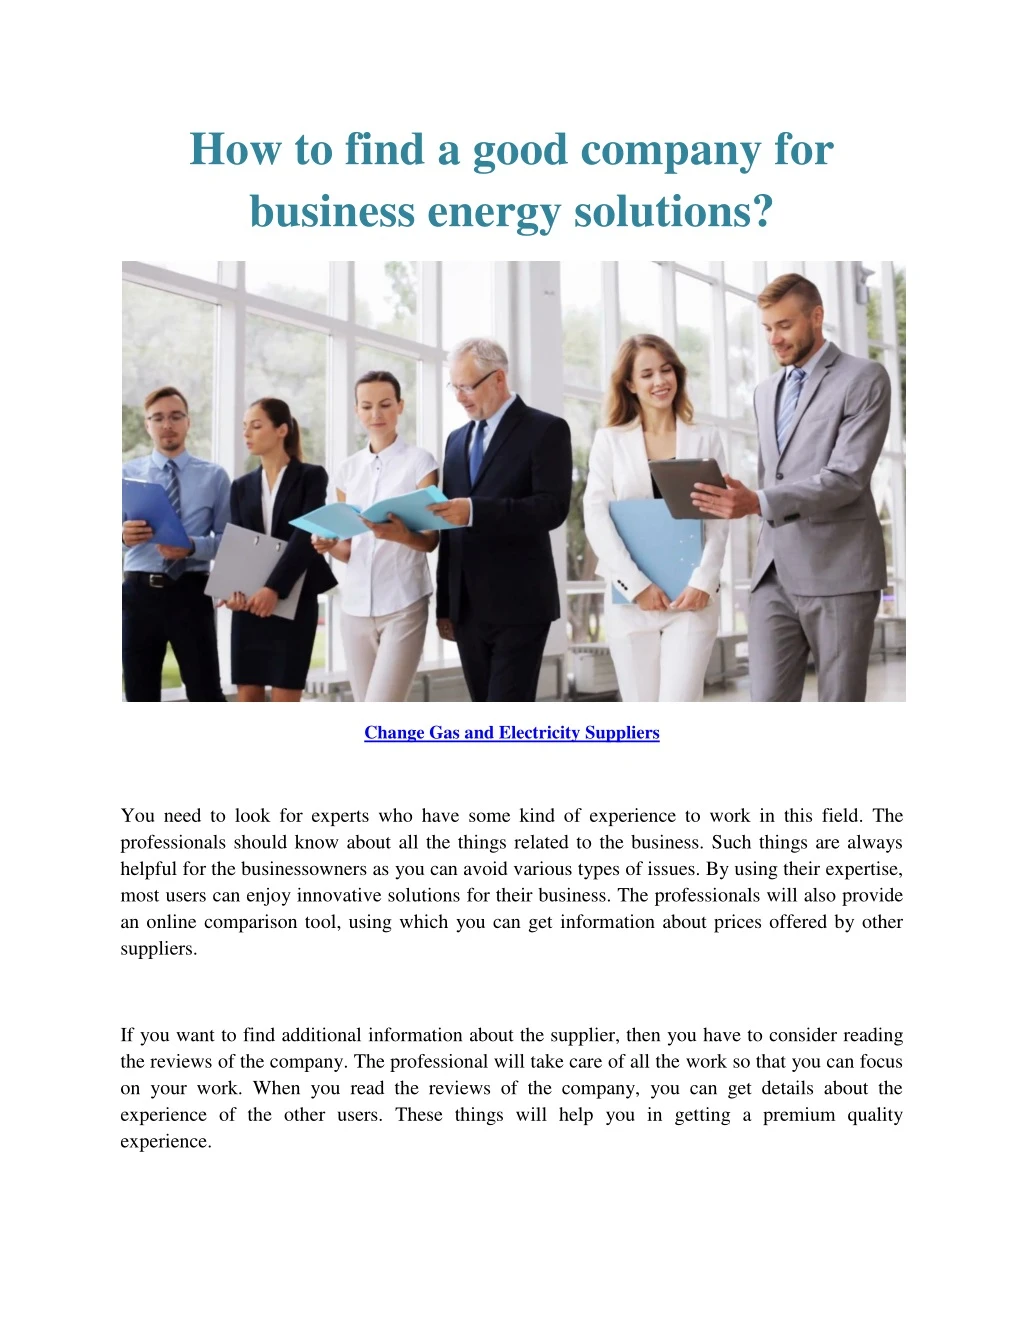 how to find a good company for business energy